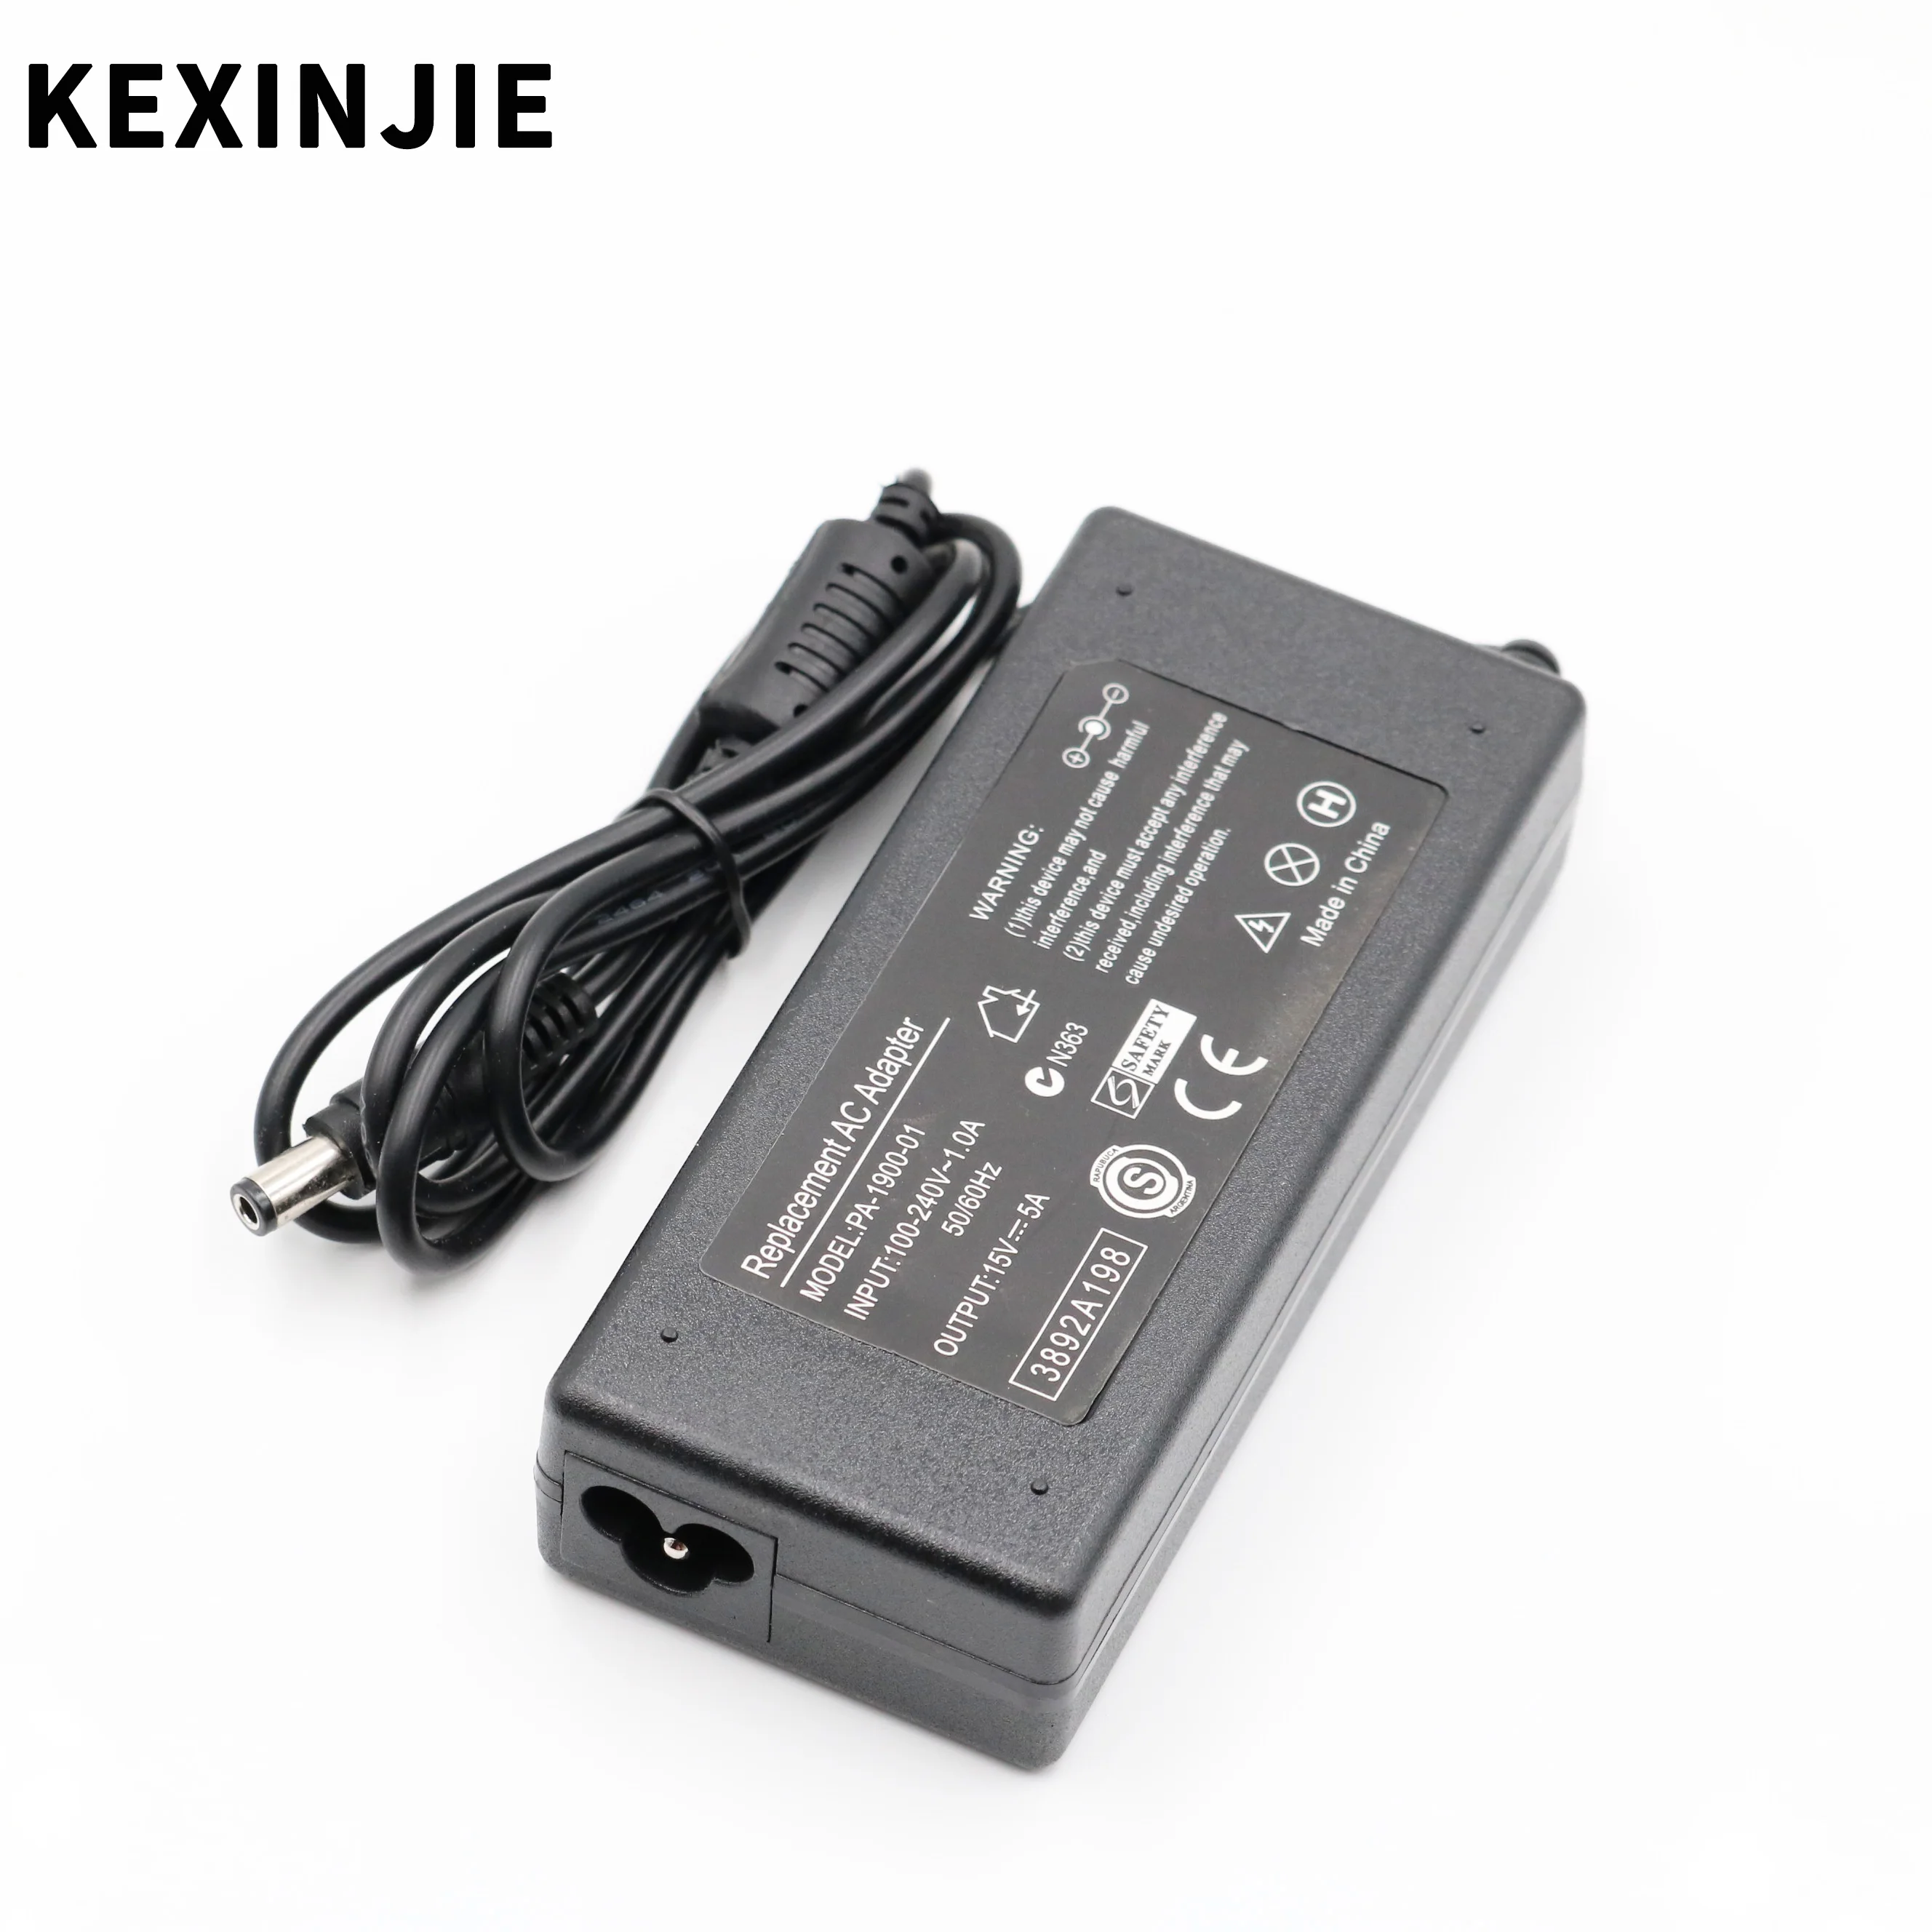 

New 6.3mm*3.0mm Jack 75W AC Adapter Charger Power Supply 15V 5A For Toshiba Tecra A6-10 M100 M200 Laptop Adapter Charger Power